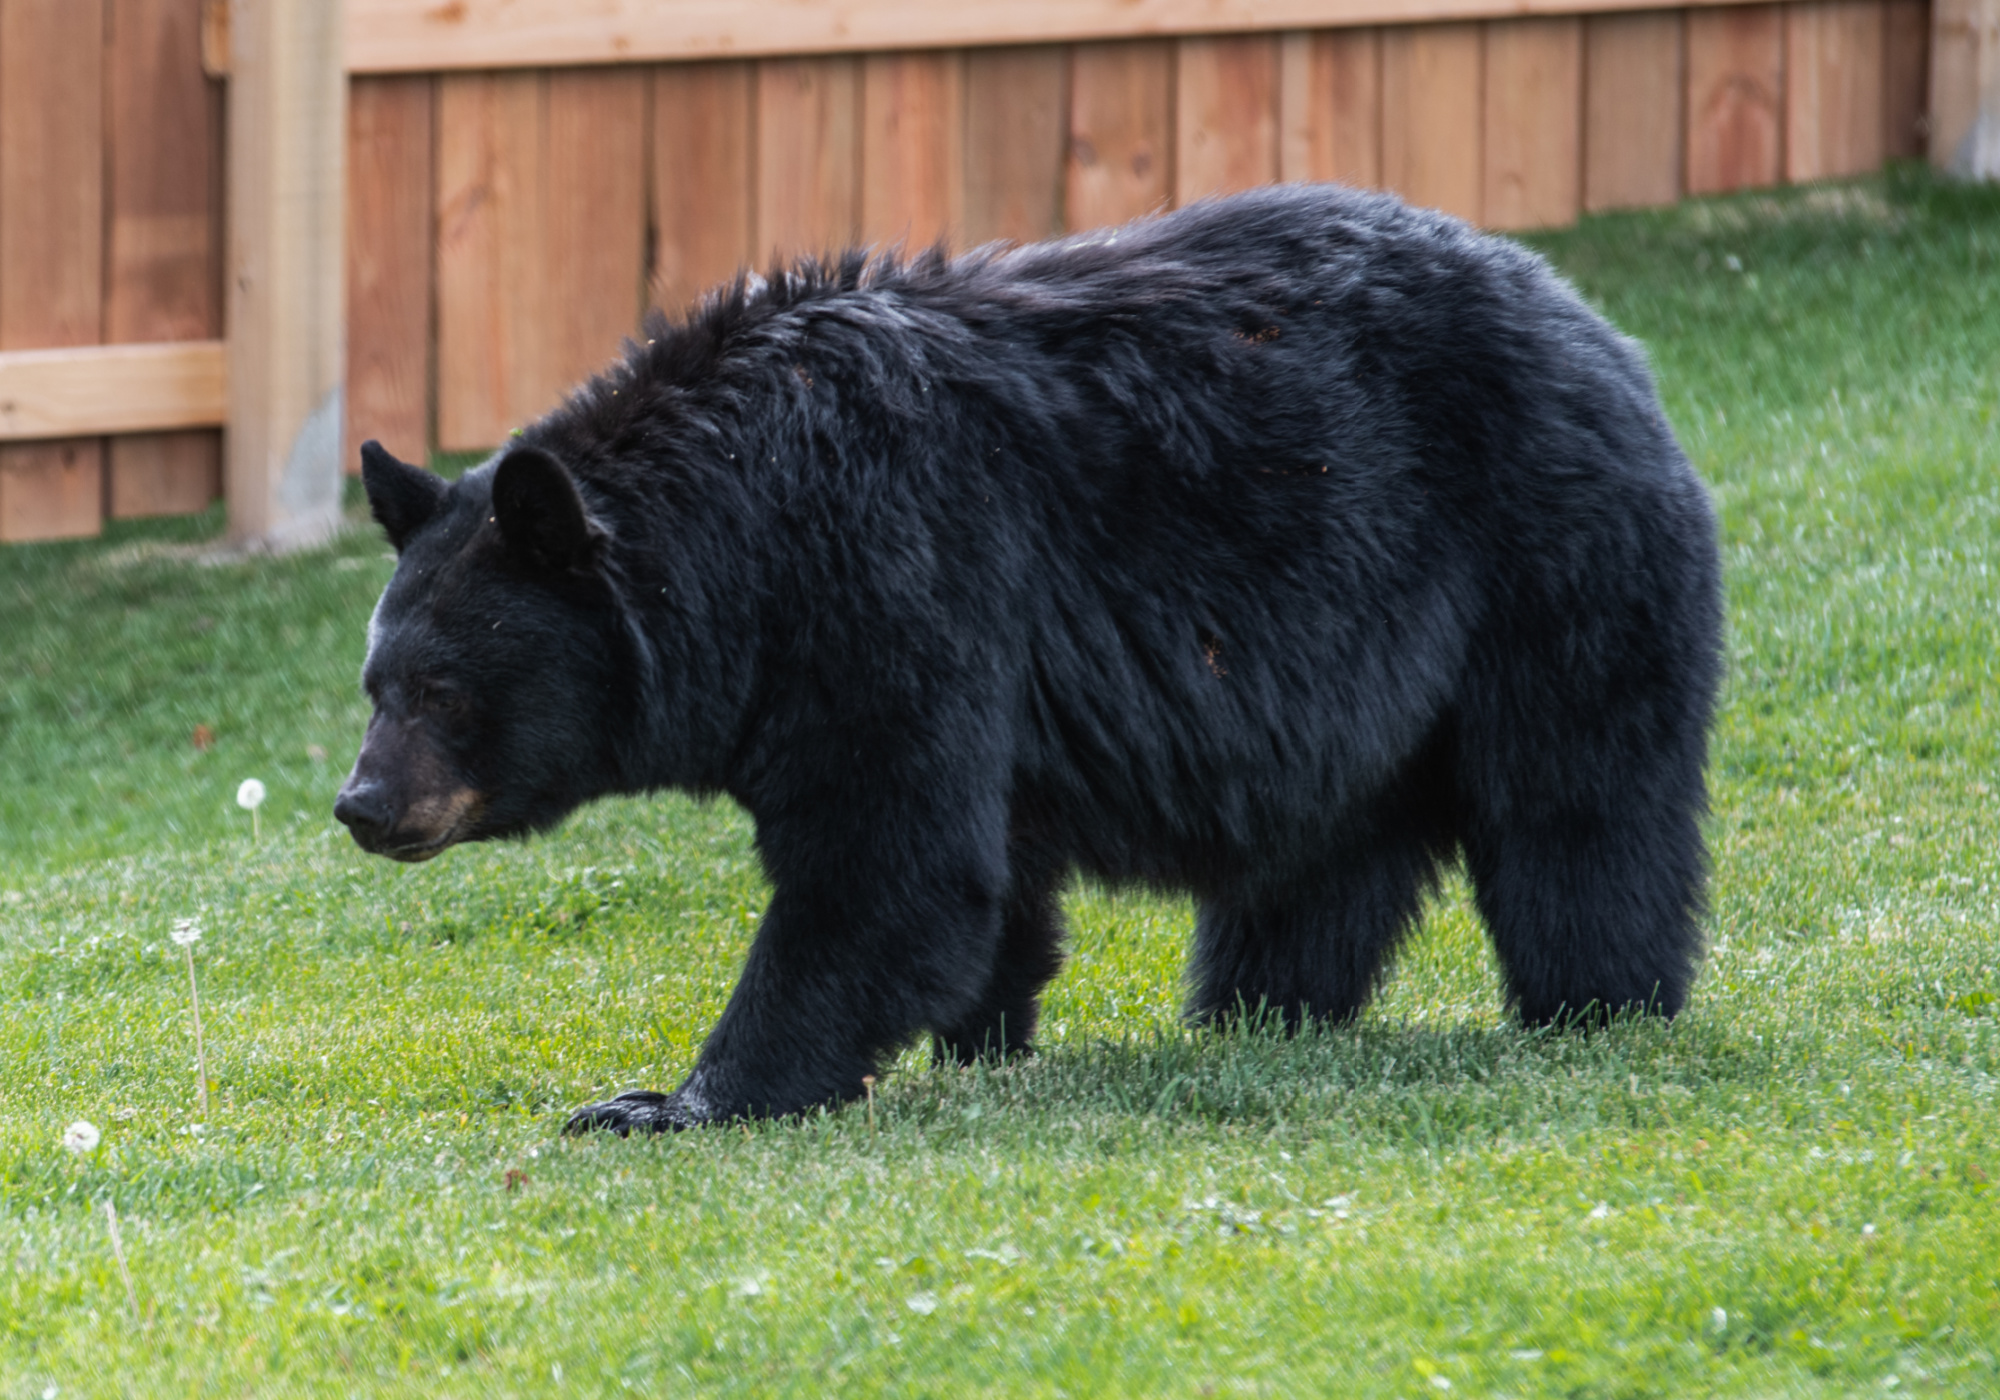 Washington Woman Fends Off Black Bear Attack in Her Own Yard by Punching the Bear in the Nose